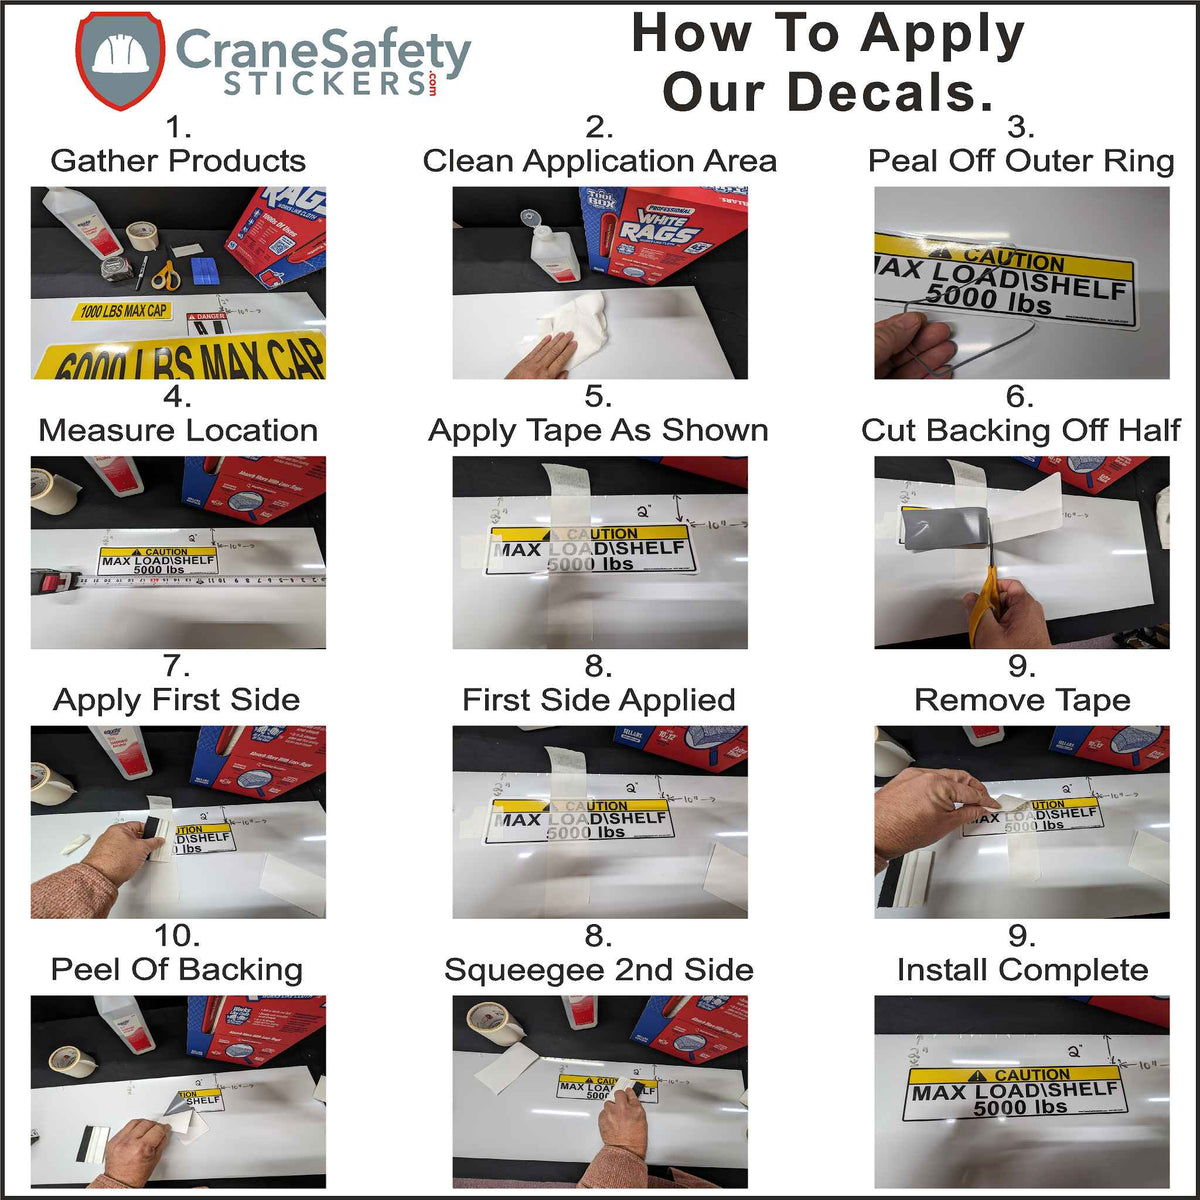 How To Apply Our DANGER Clearance for Operating Equipment Near Power Lines Safety Sticker.